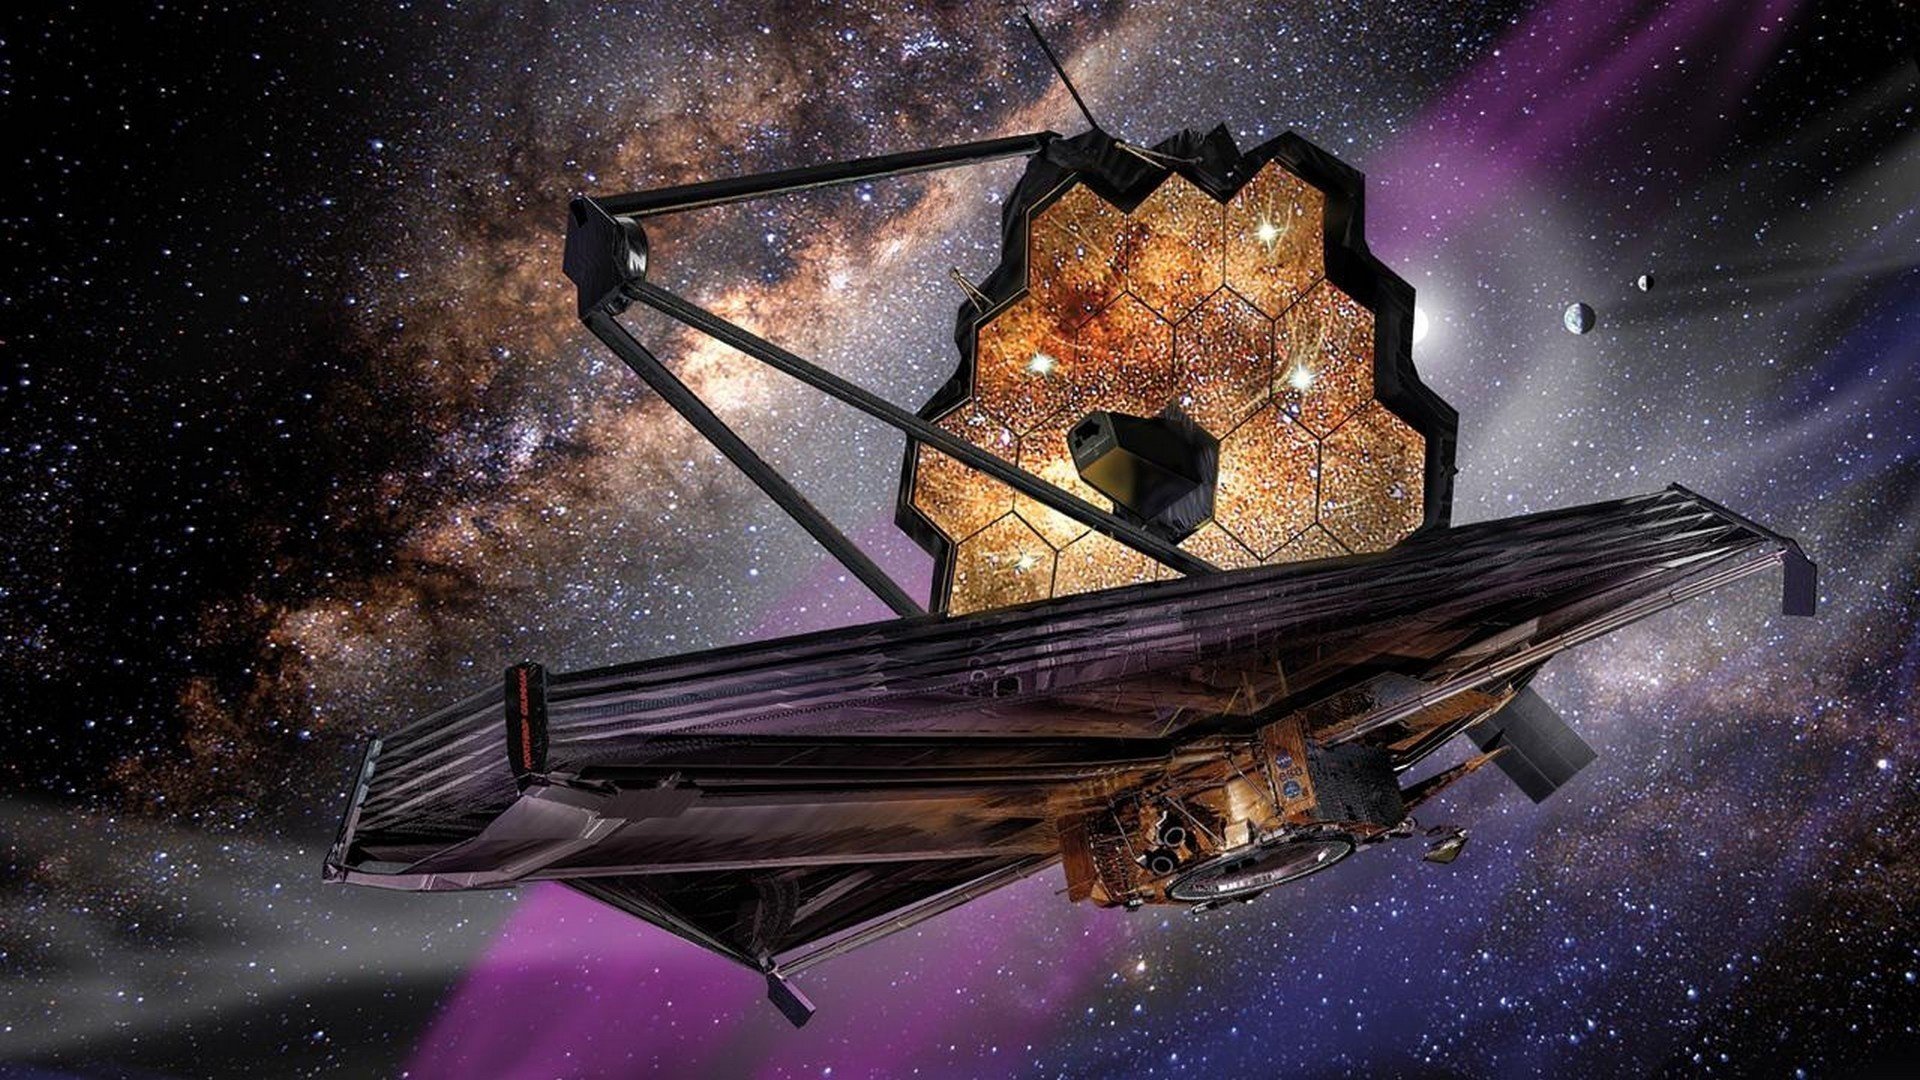 James Webb Space Telescope photos might be the best Galaxy wallpapers   SamMobile